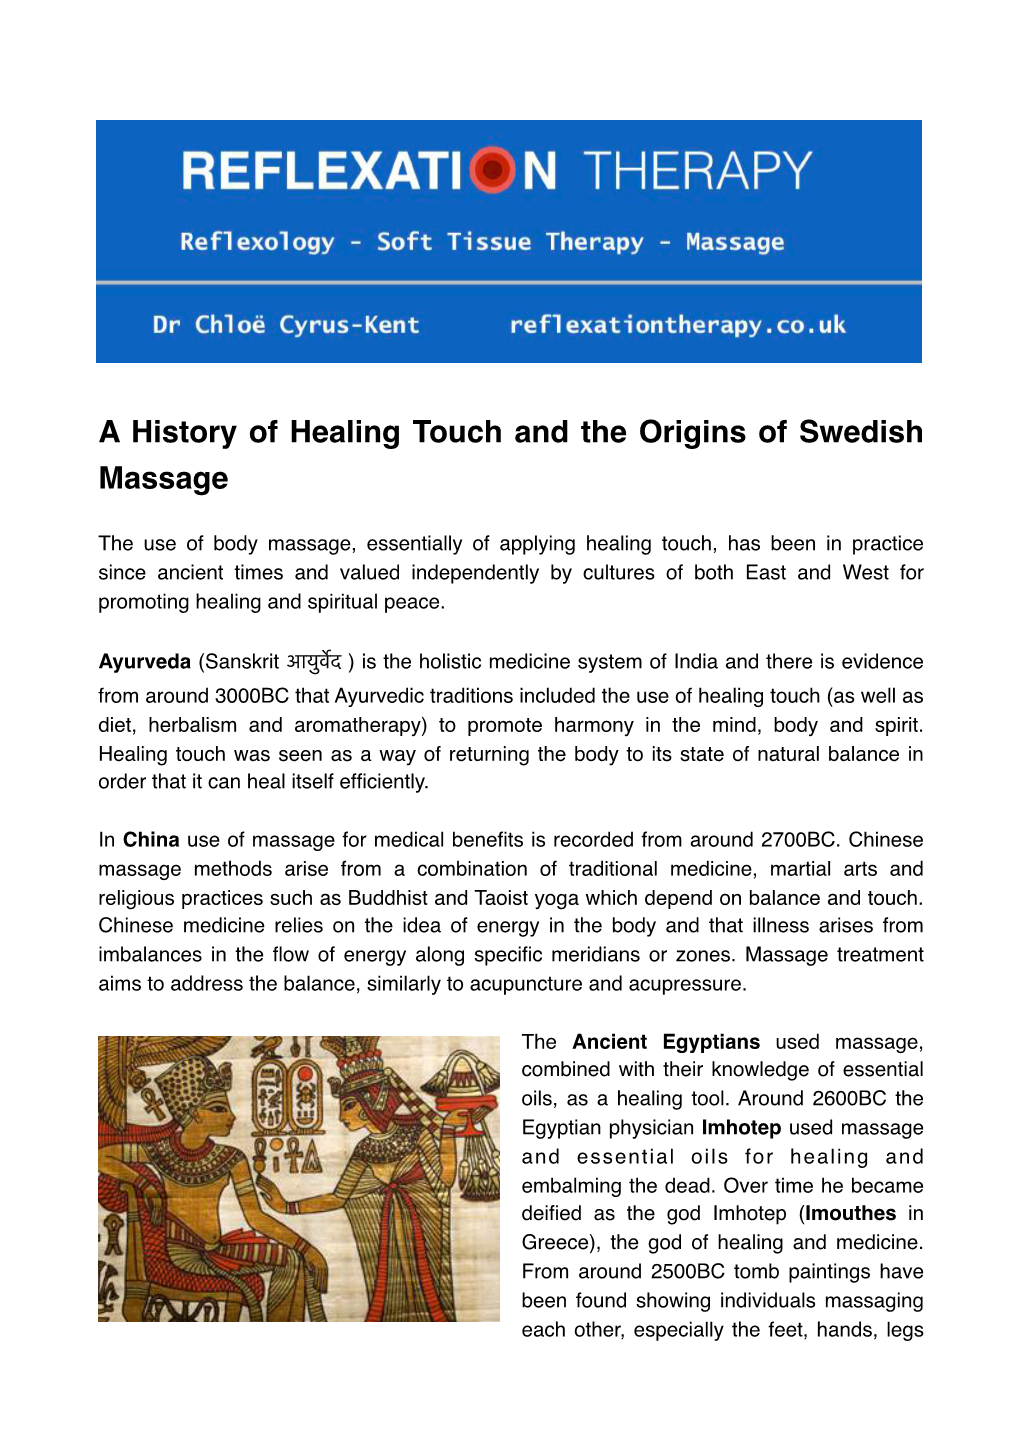 A History of Healing Touch and the Origins of Swedish Massage